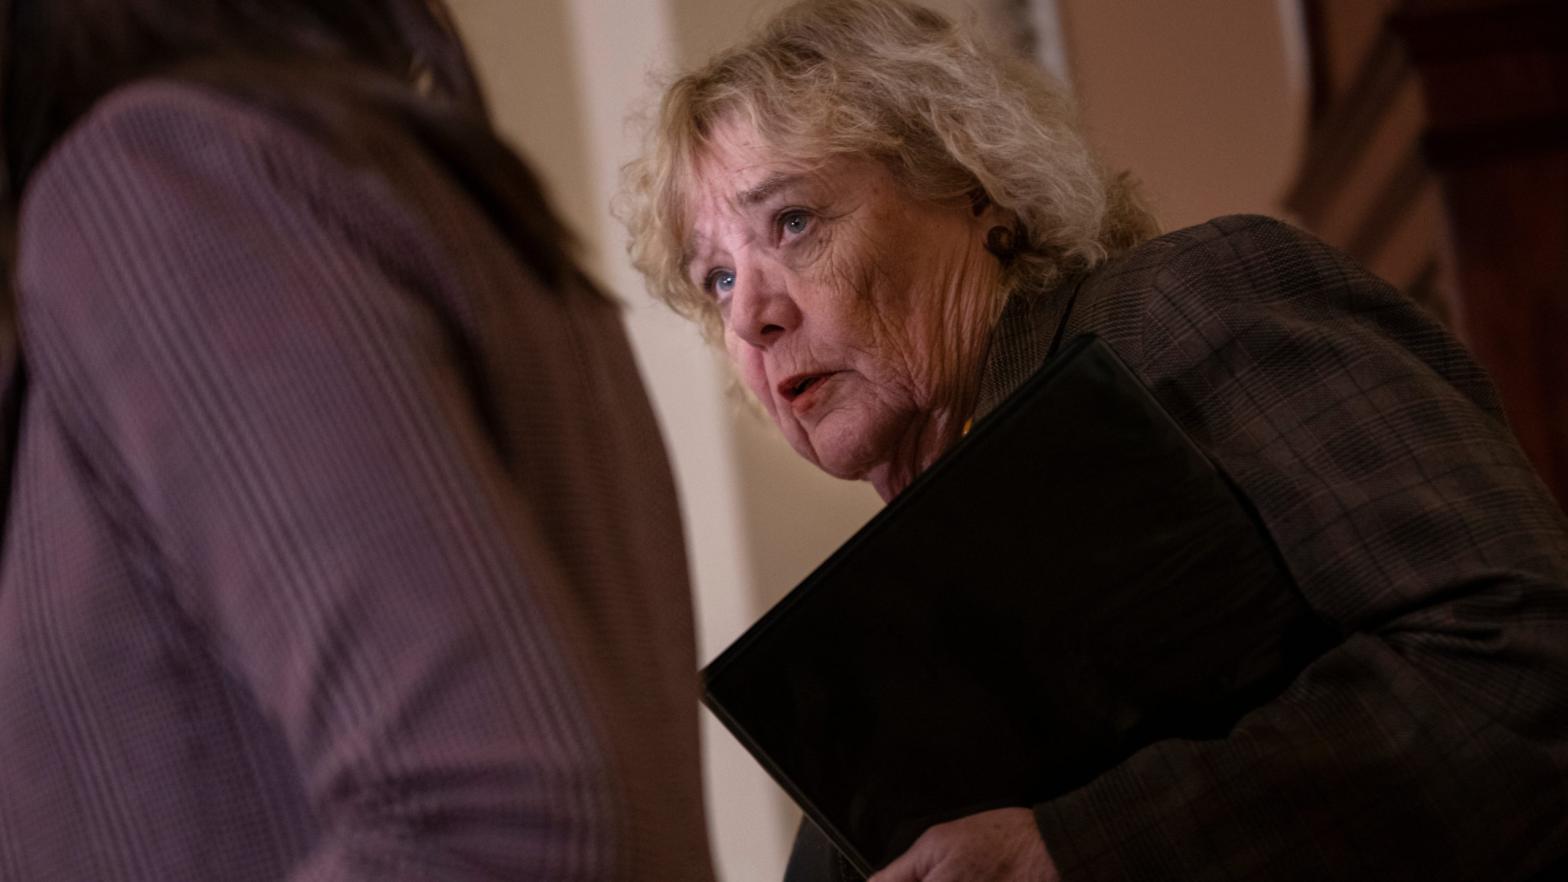 Rep. Zoe Lofgren (D-CA), who along with Rep. Warren Davidson (D-OH) has led efforts to reform the USA Patriot Act in the House, is photographed walking to the Senate floor during the impeachment trial of President Trump on January 27, 2020 in Washington, DC.  (Photo: Samuel Corum, Getty)